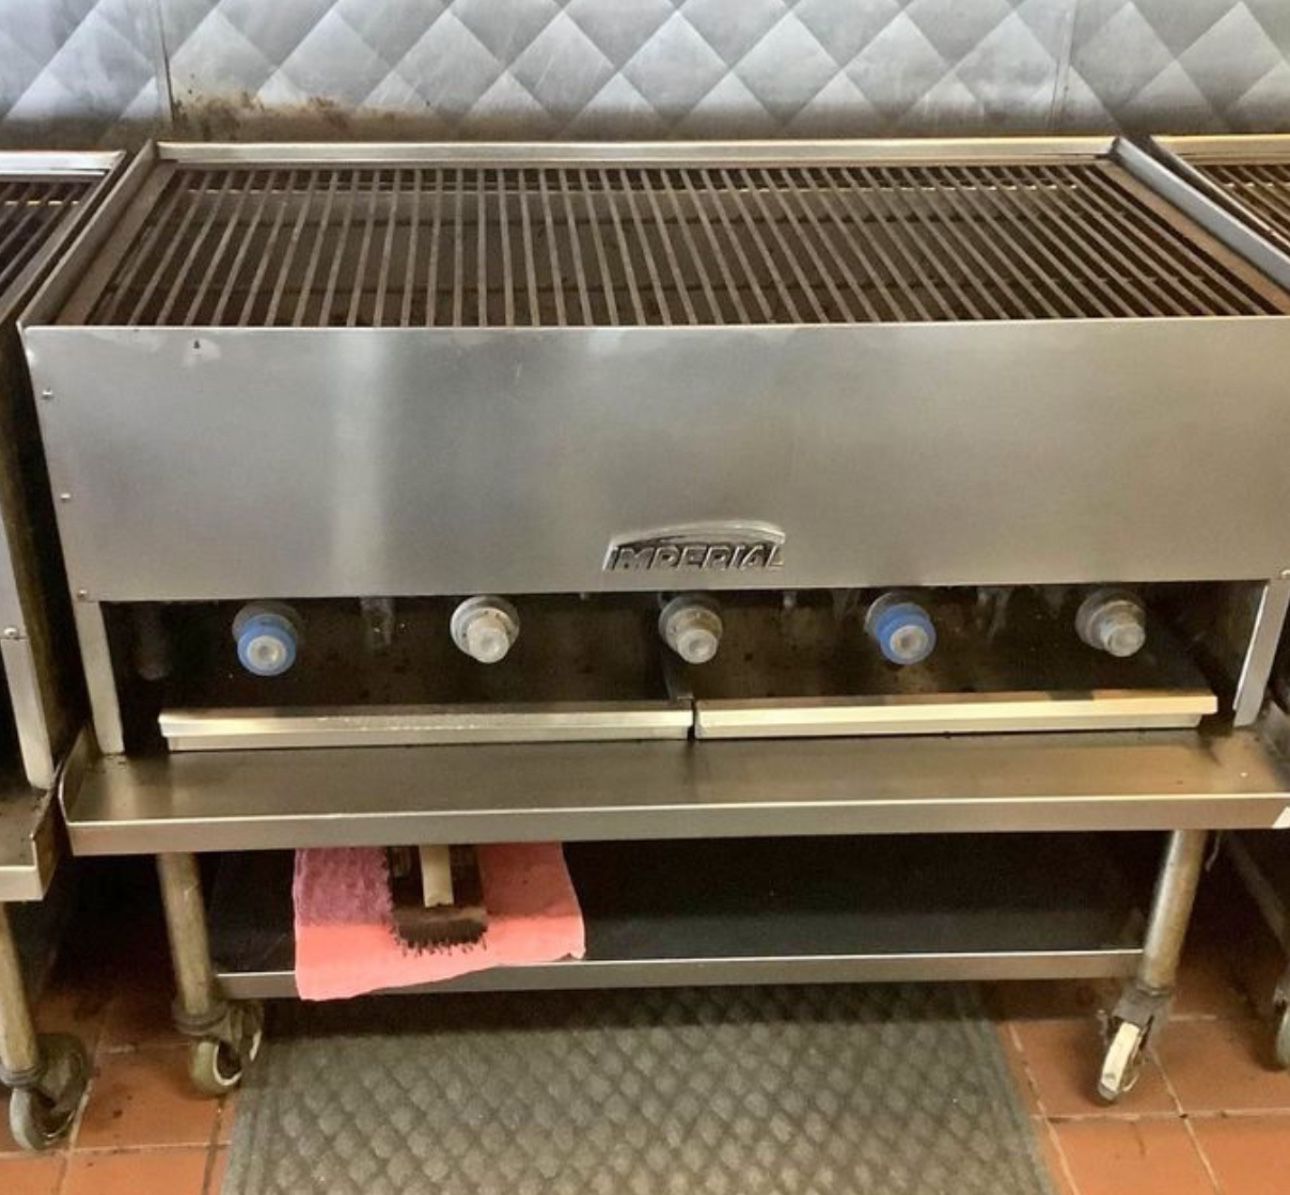 48”x27”Industrial Broiler/grill On Rolling Table. 